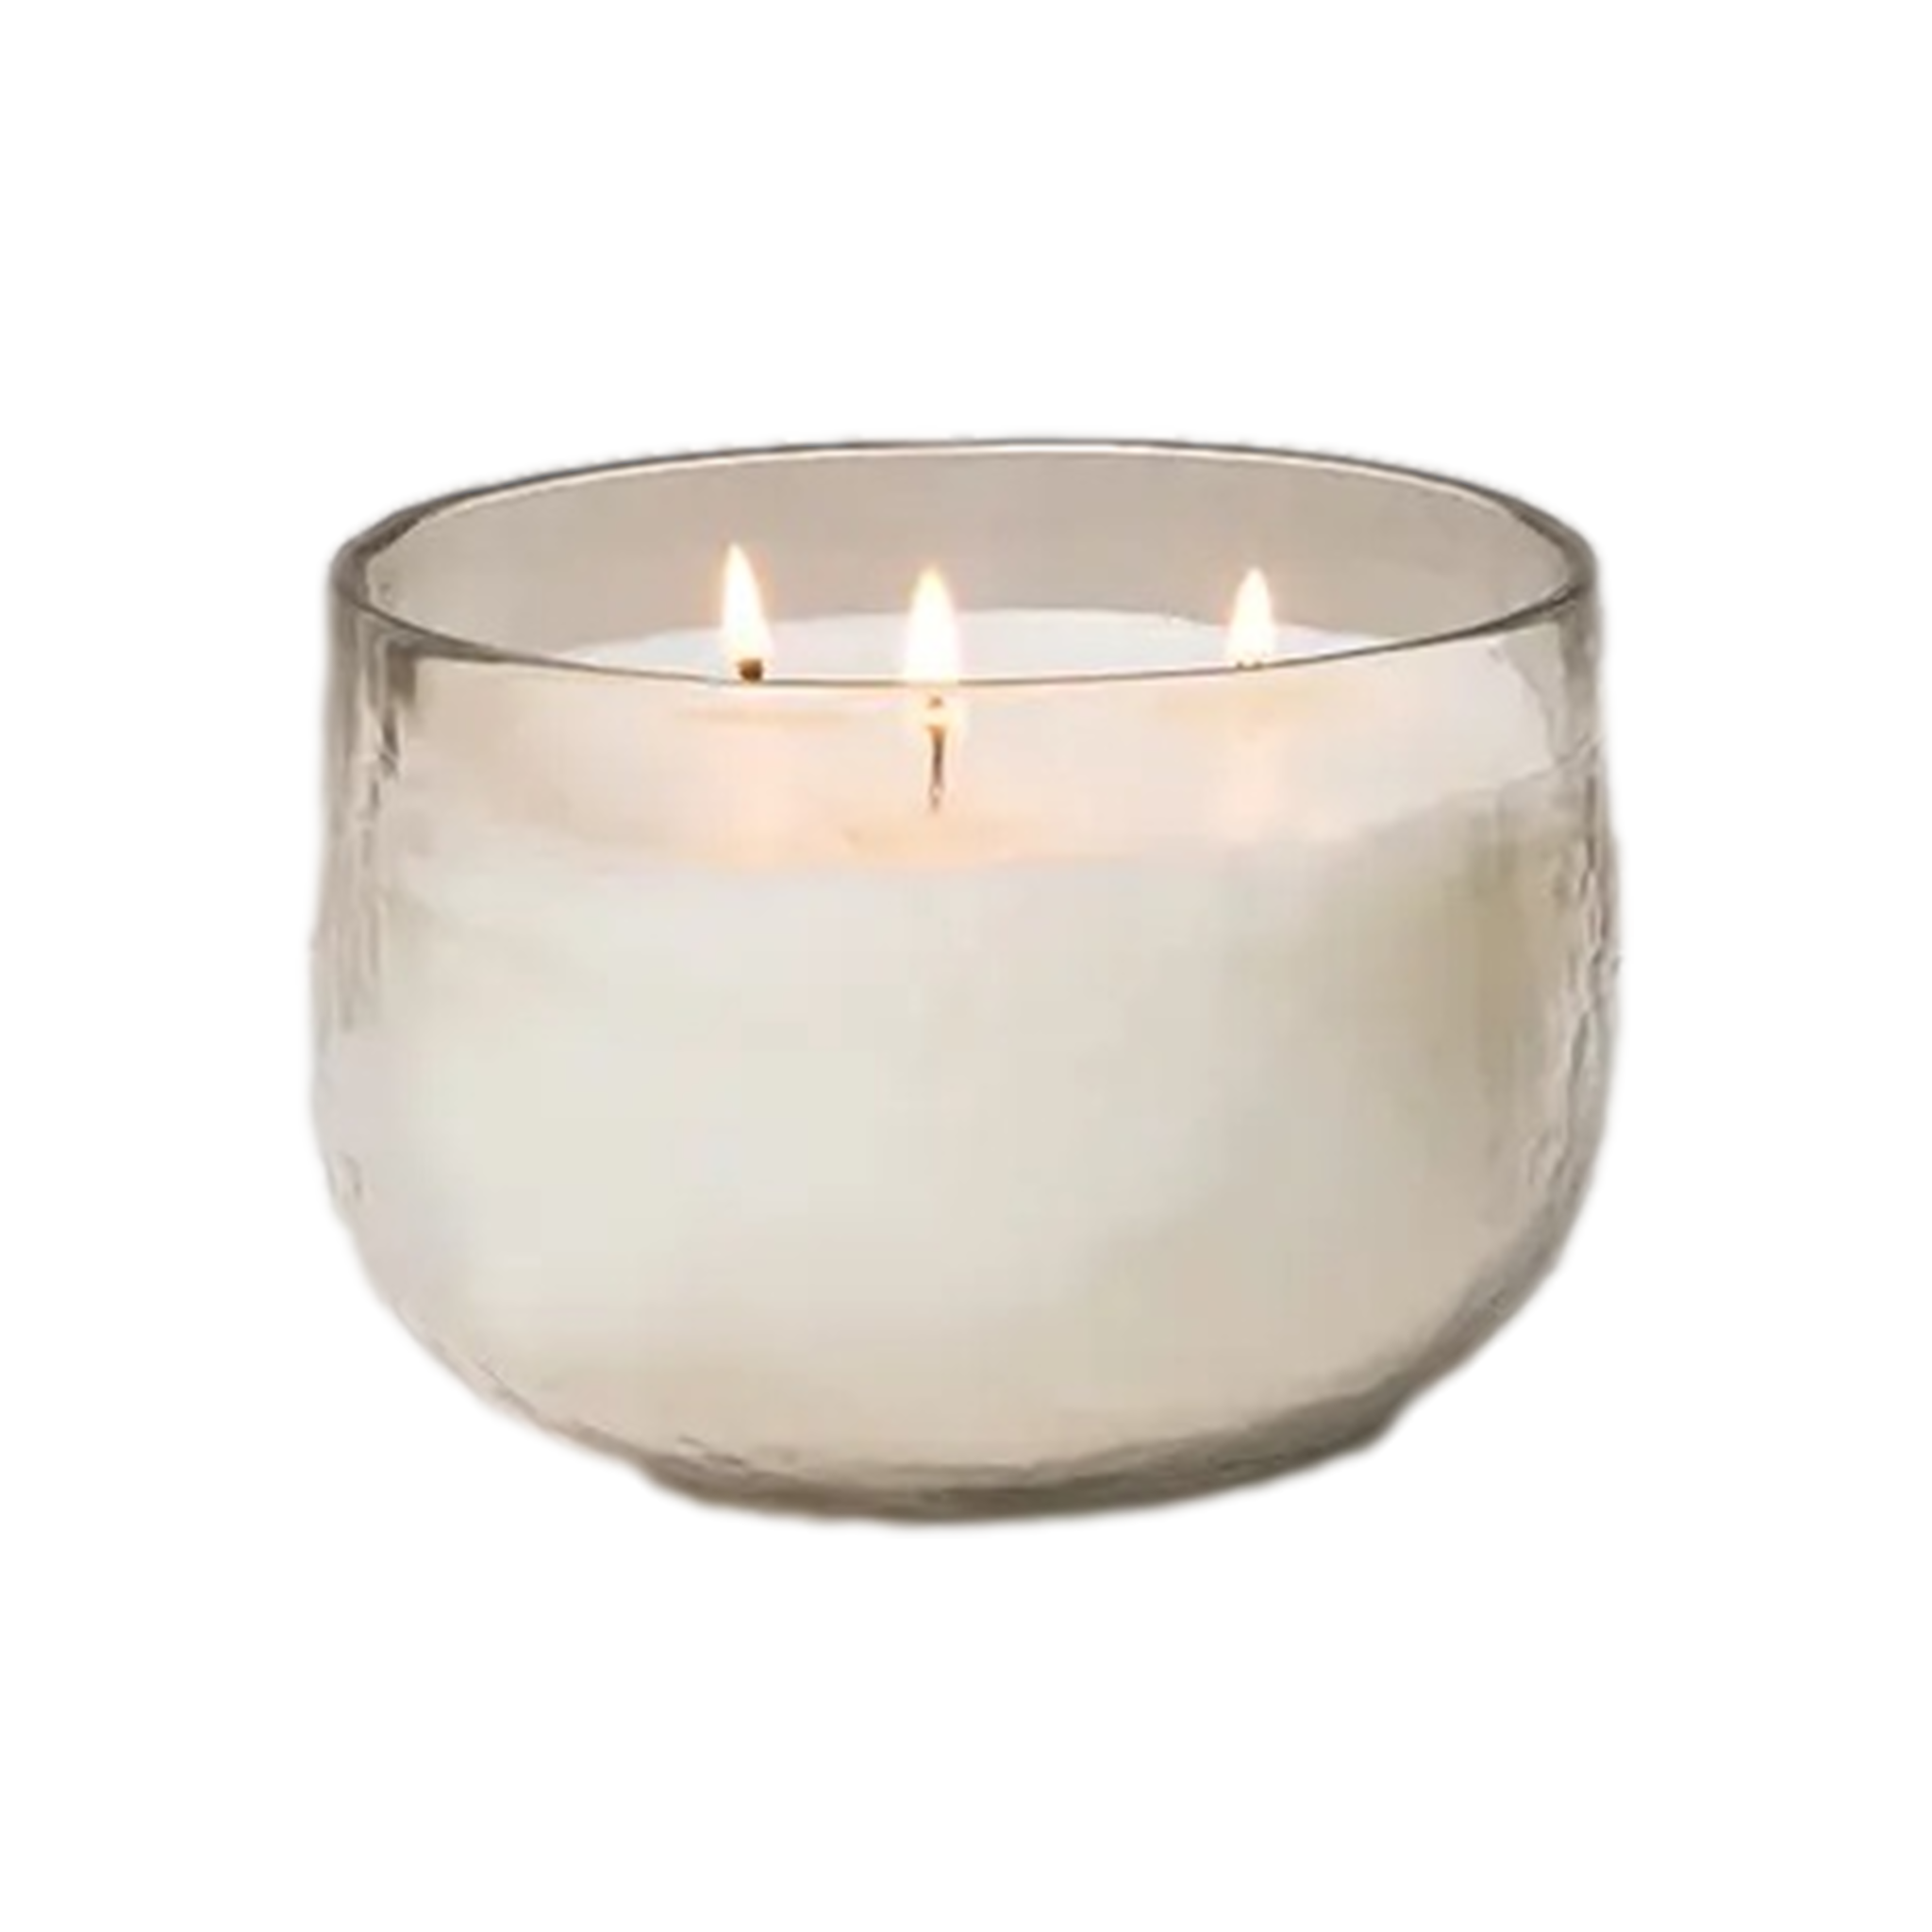 Triple-Wick Candle Bowl